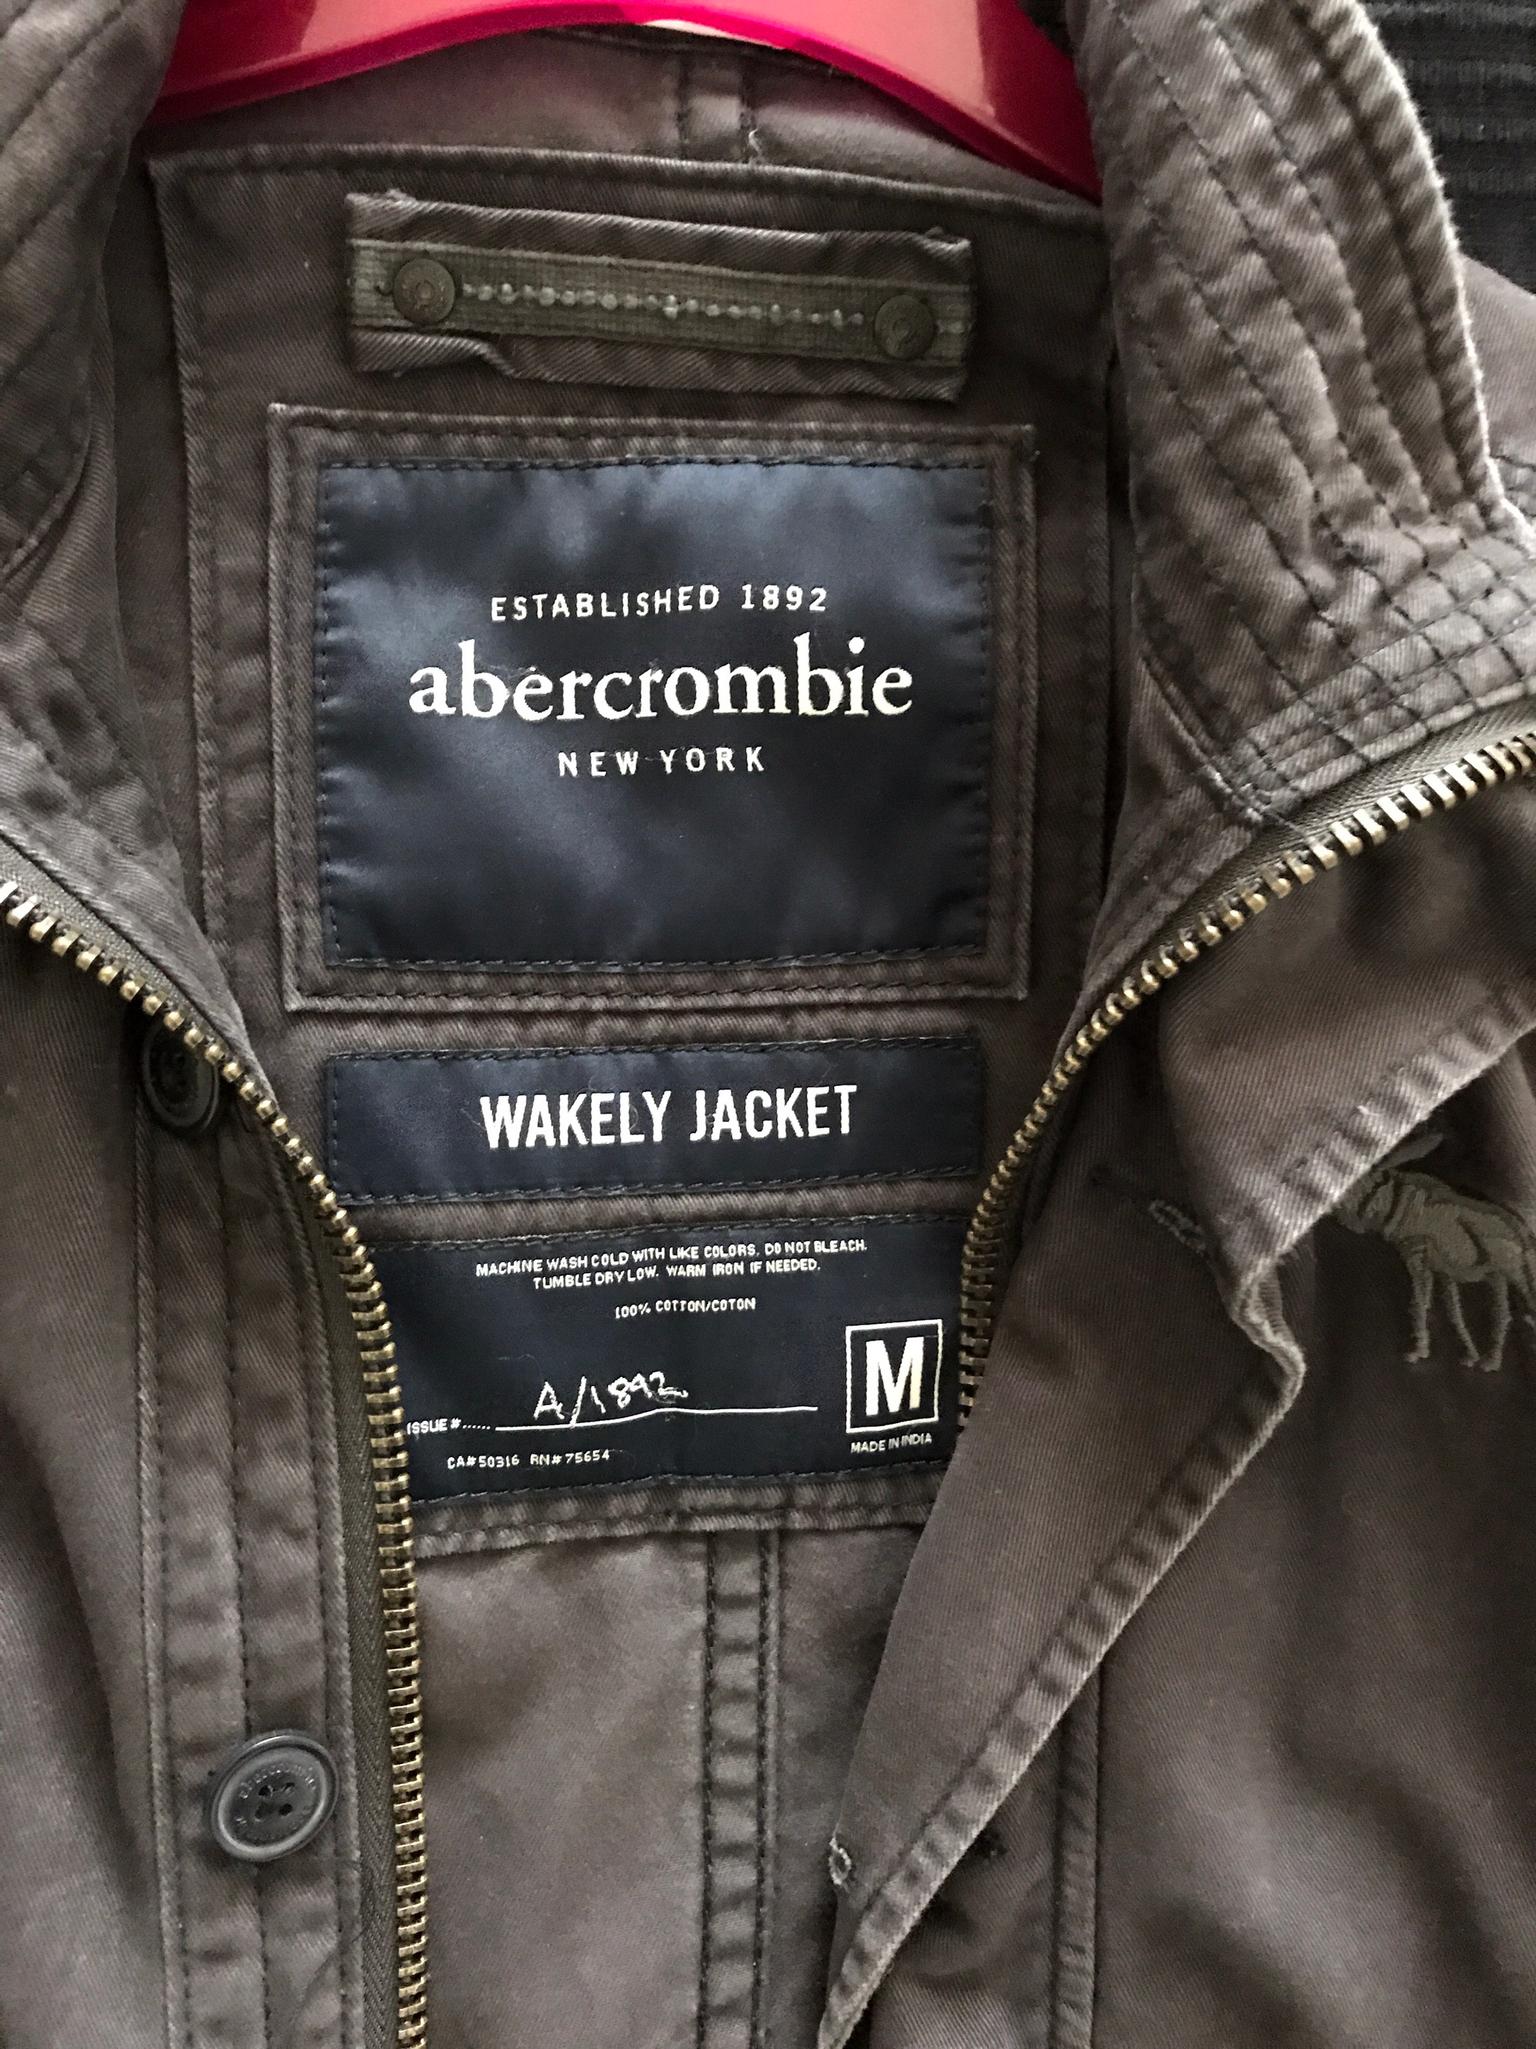 abercrombie & fitch wakely